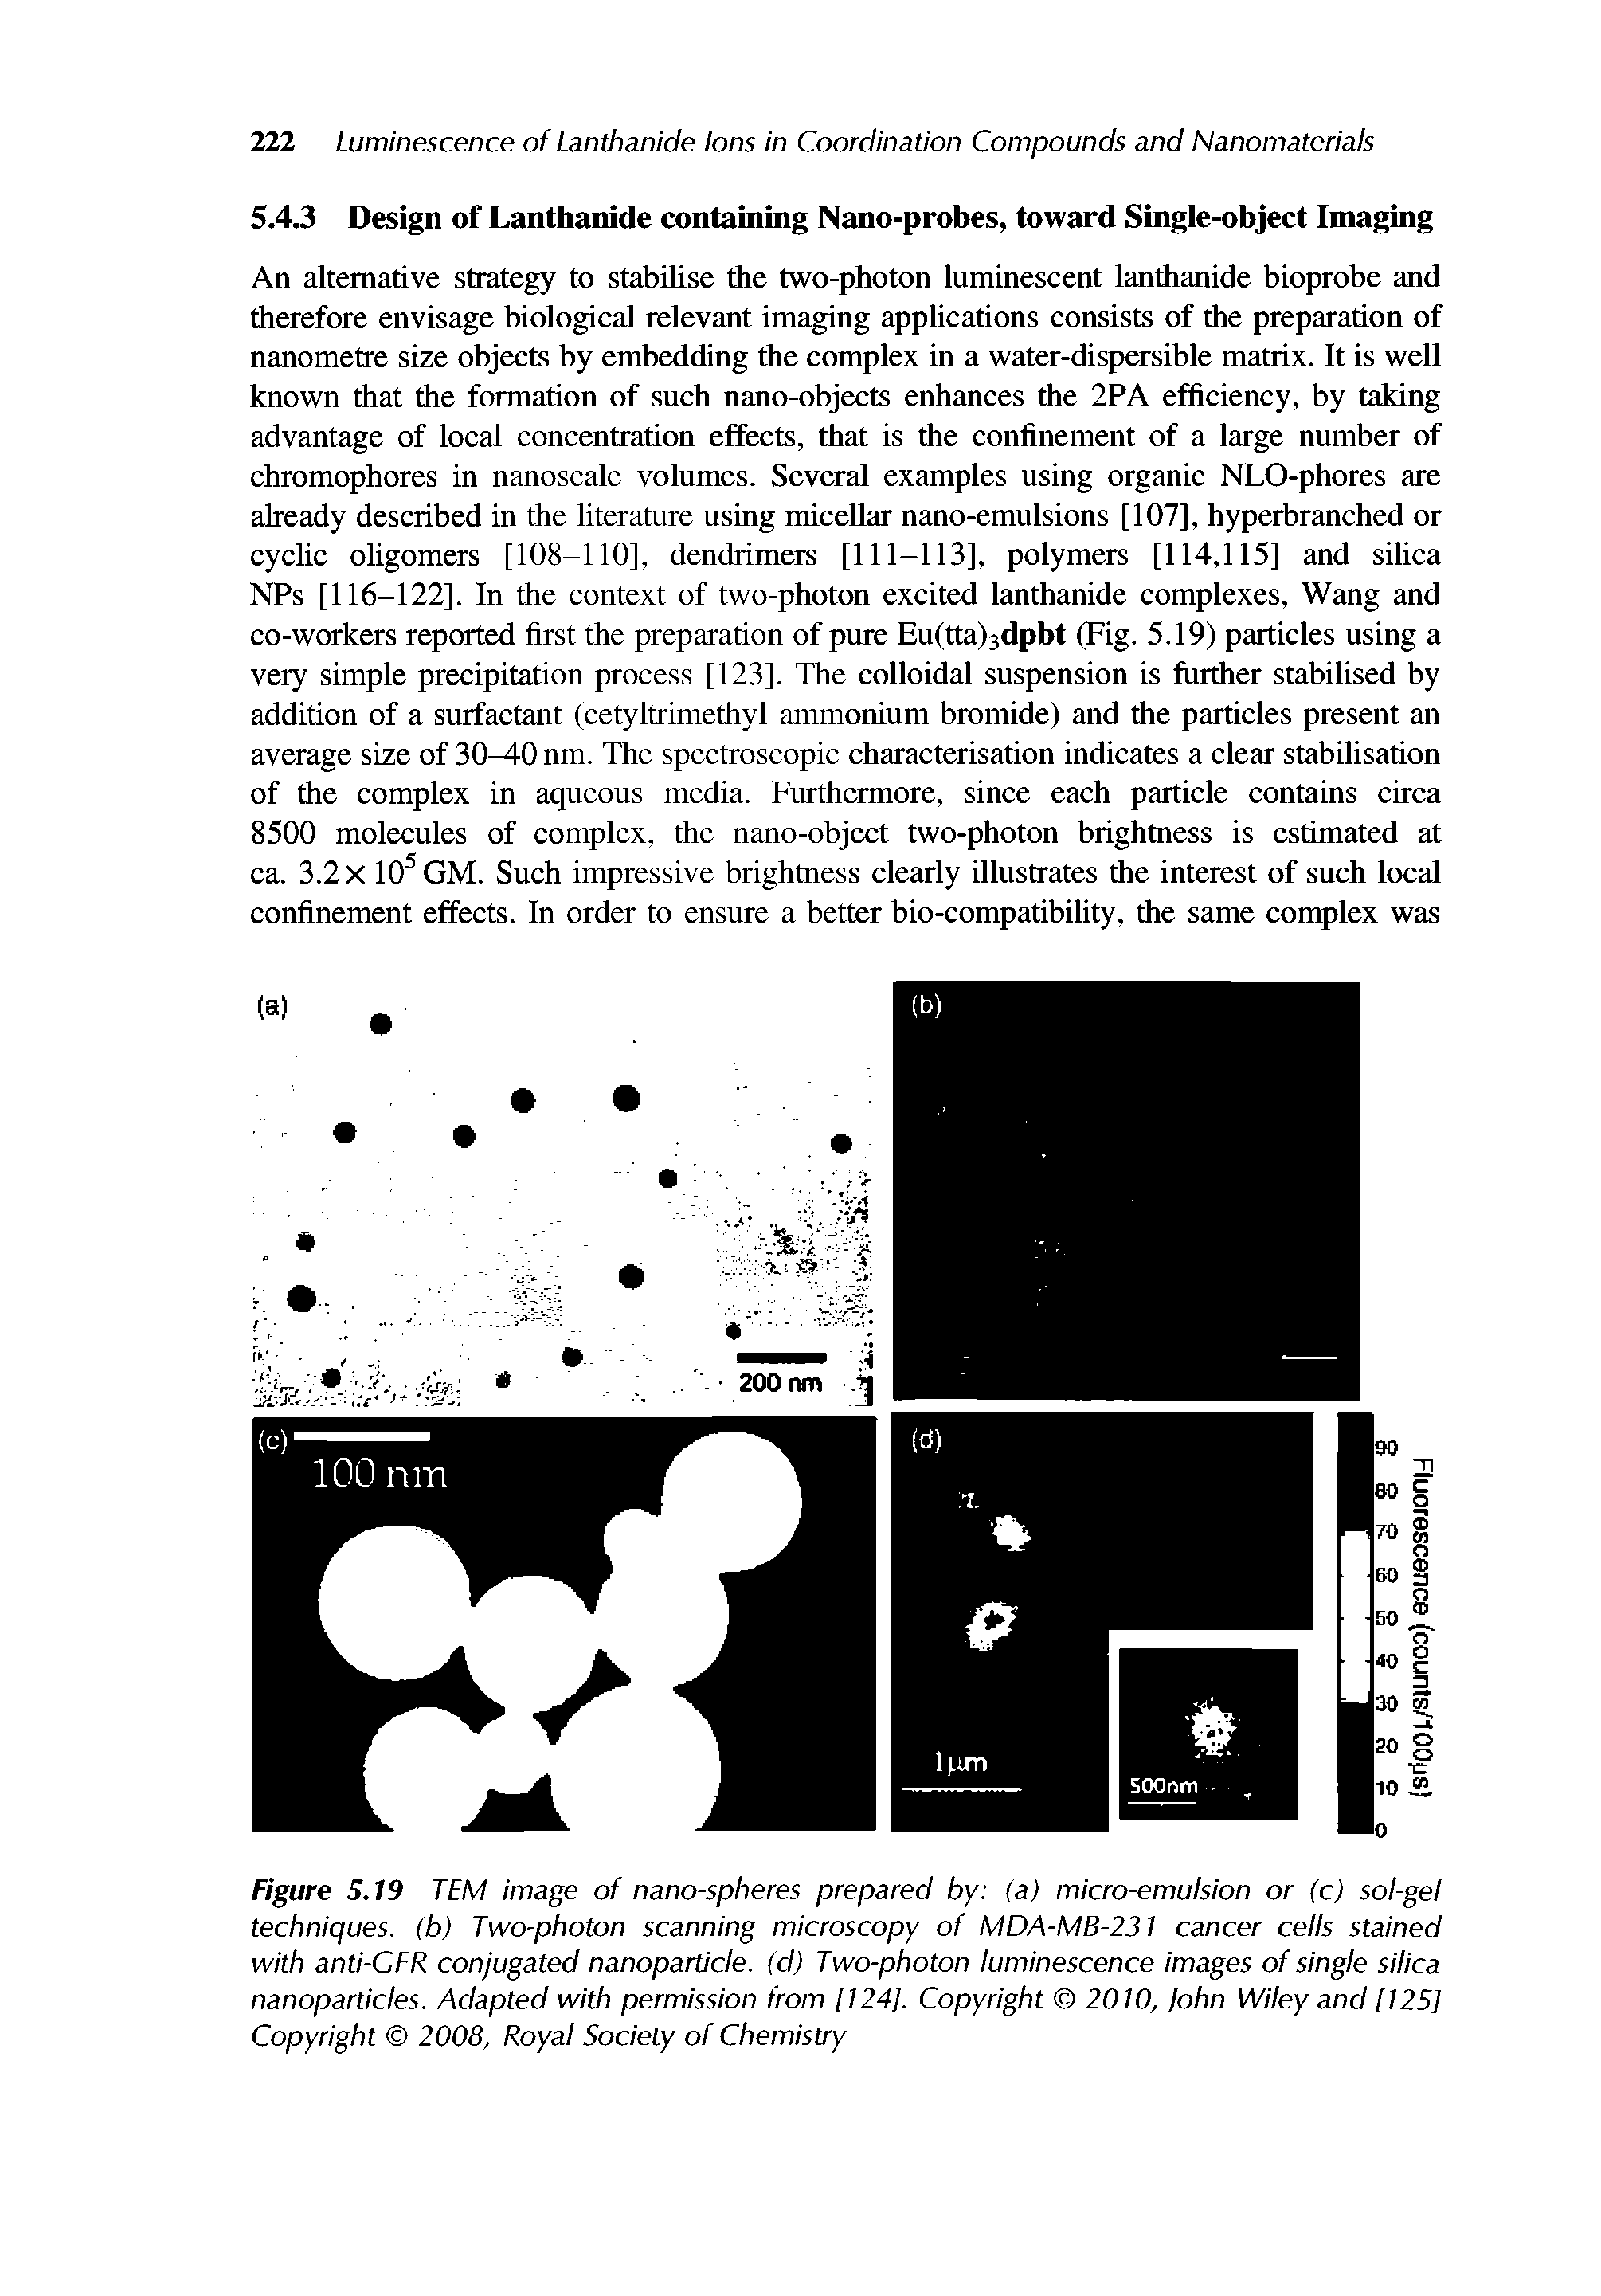 Figure 5.19 TEM image of nano-spheres prepared by (a) micro-emulsion or (c) sol-gel techniques, (b) Two-photon scanning microscopy of MDA-MB-231 cancer cells stained with anti-CFR conjugated nanoparticle, (d) Two-photon luminescence images of single silica nanoparticles. Adapted with permission from [124]. Copyright 2010, John Wiley and [125] Copyright 2008, Royal Society of Chemistry...